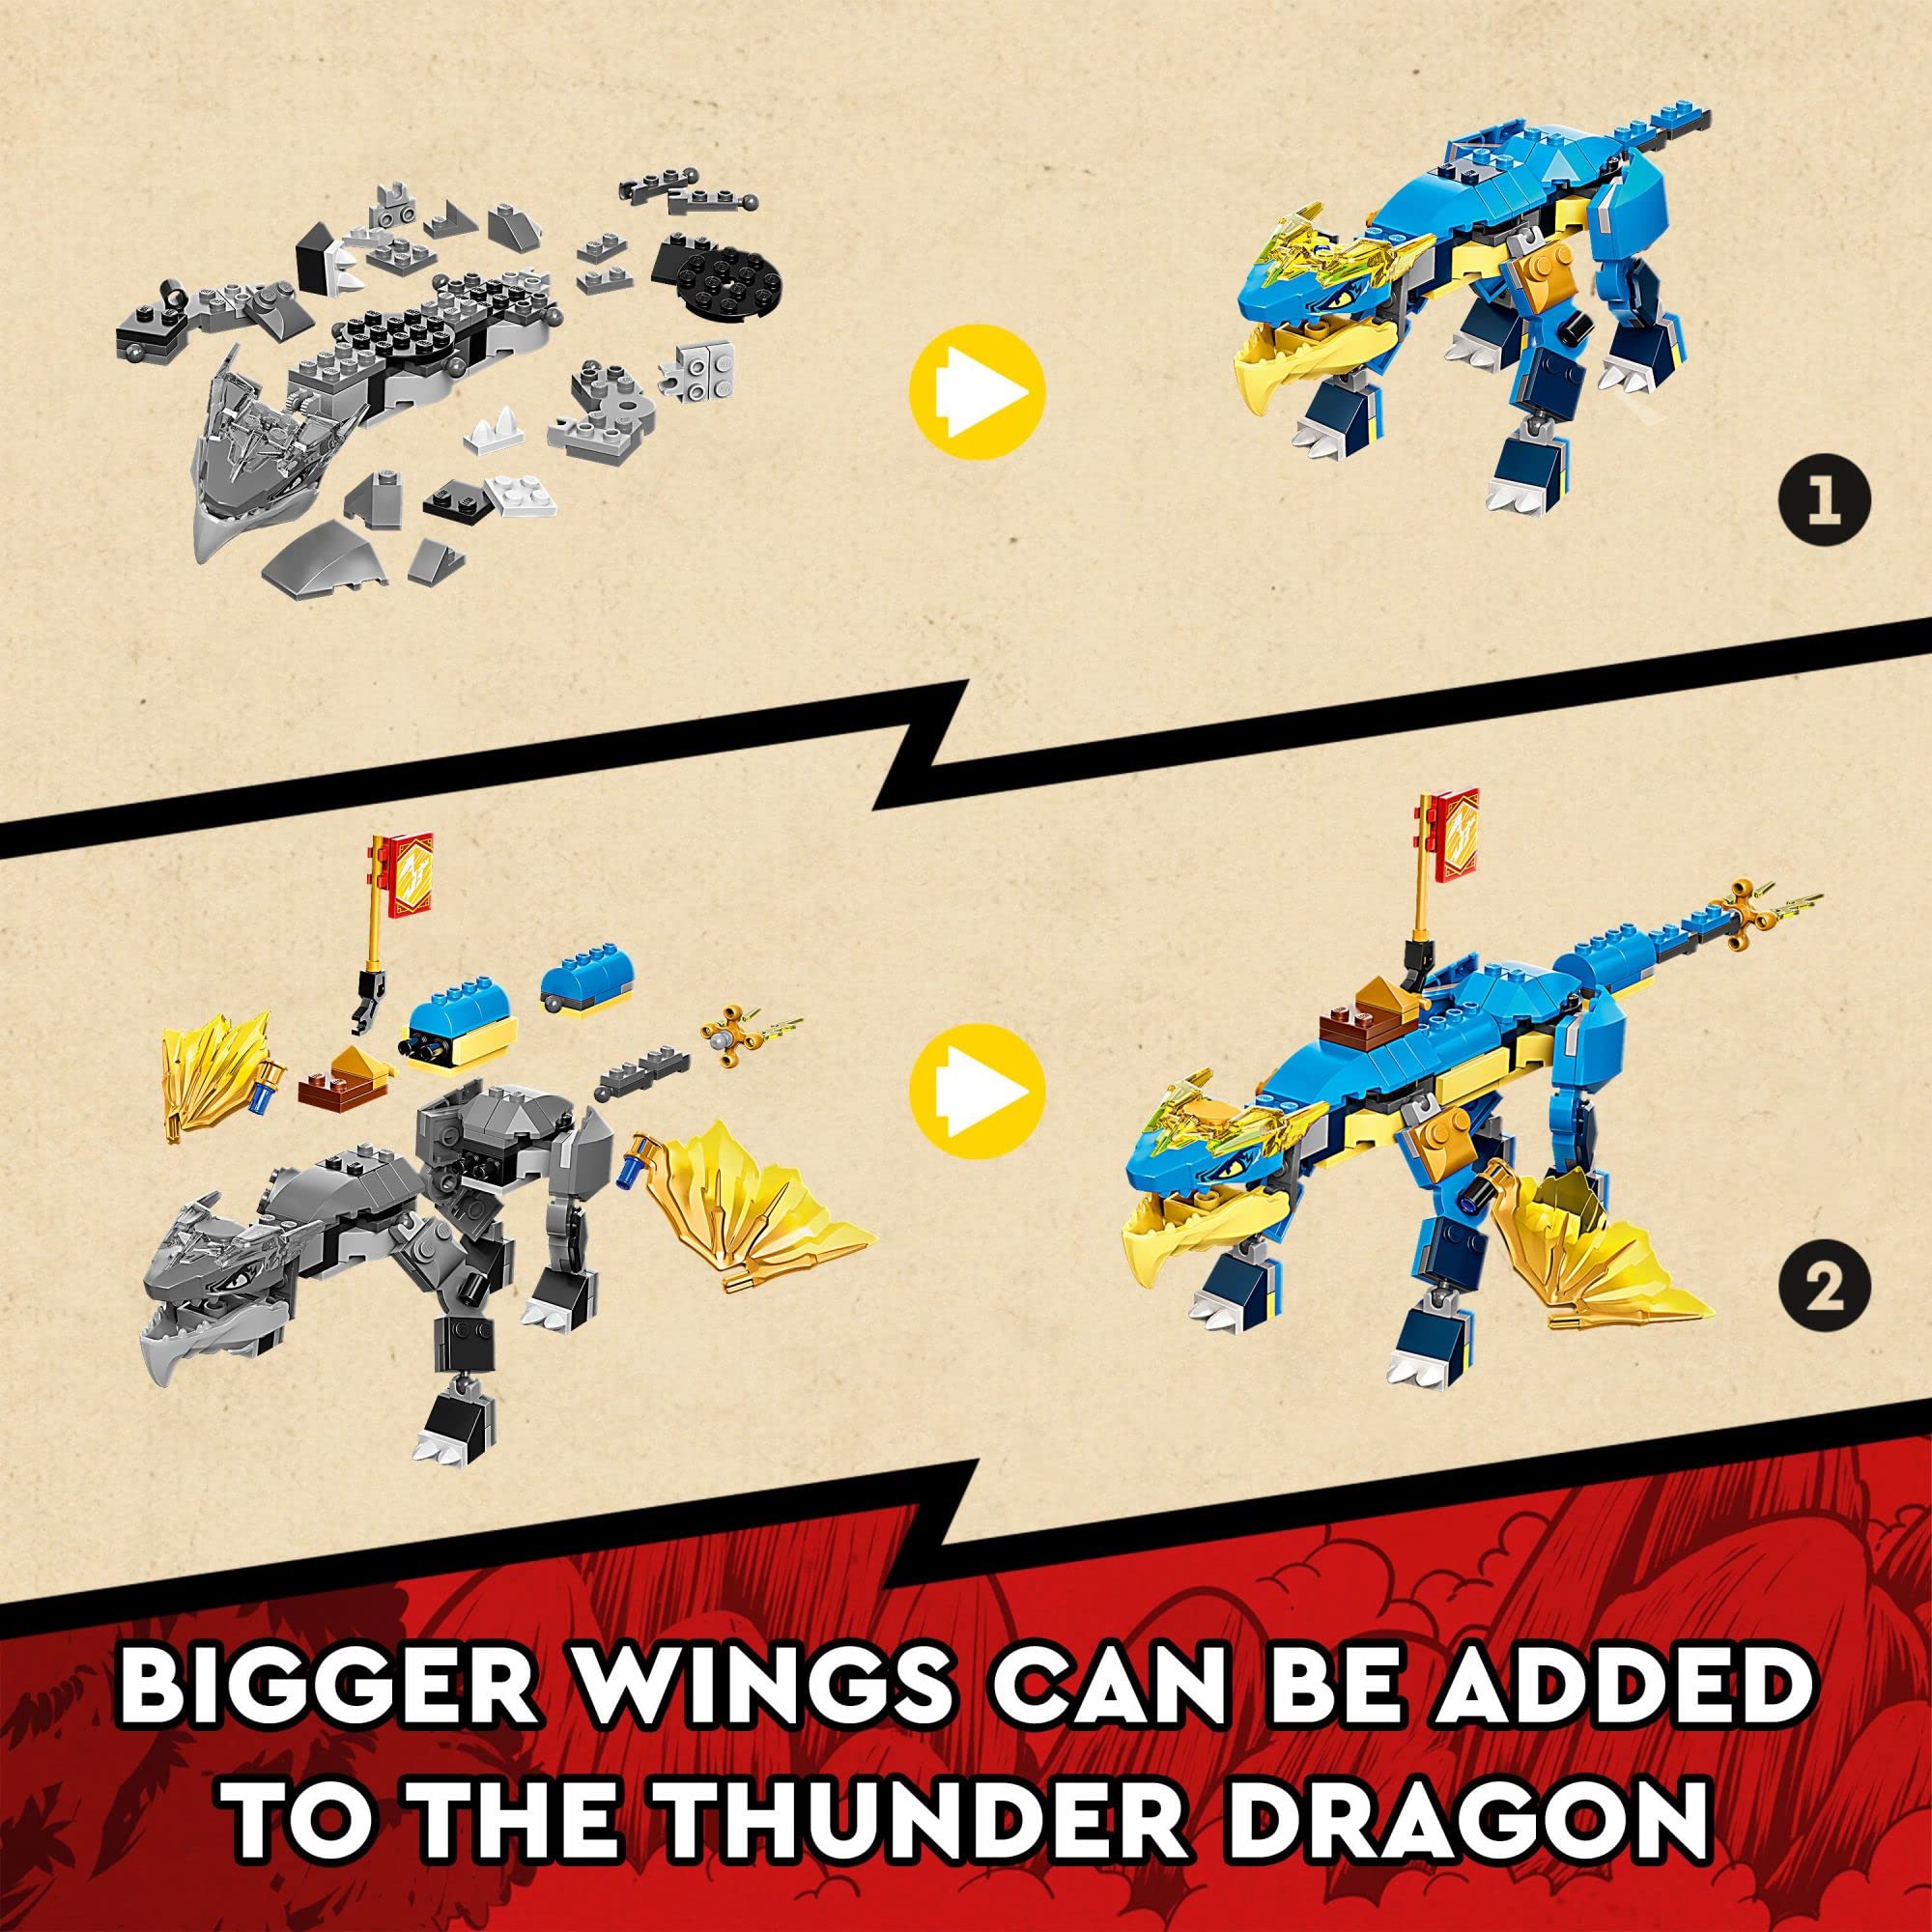 LEGO NINJAGO Jay’s Thunder Dragon EVO 71760 - Toy Figure and Viper Snake Set with Minifigures, Collectible Speed Mission Banner, Ninja Battle Adventure, Great Gift for Kids 6 Plus Years Old